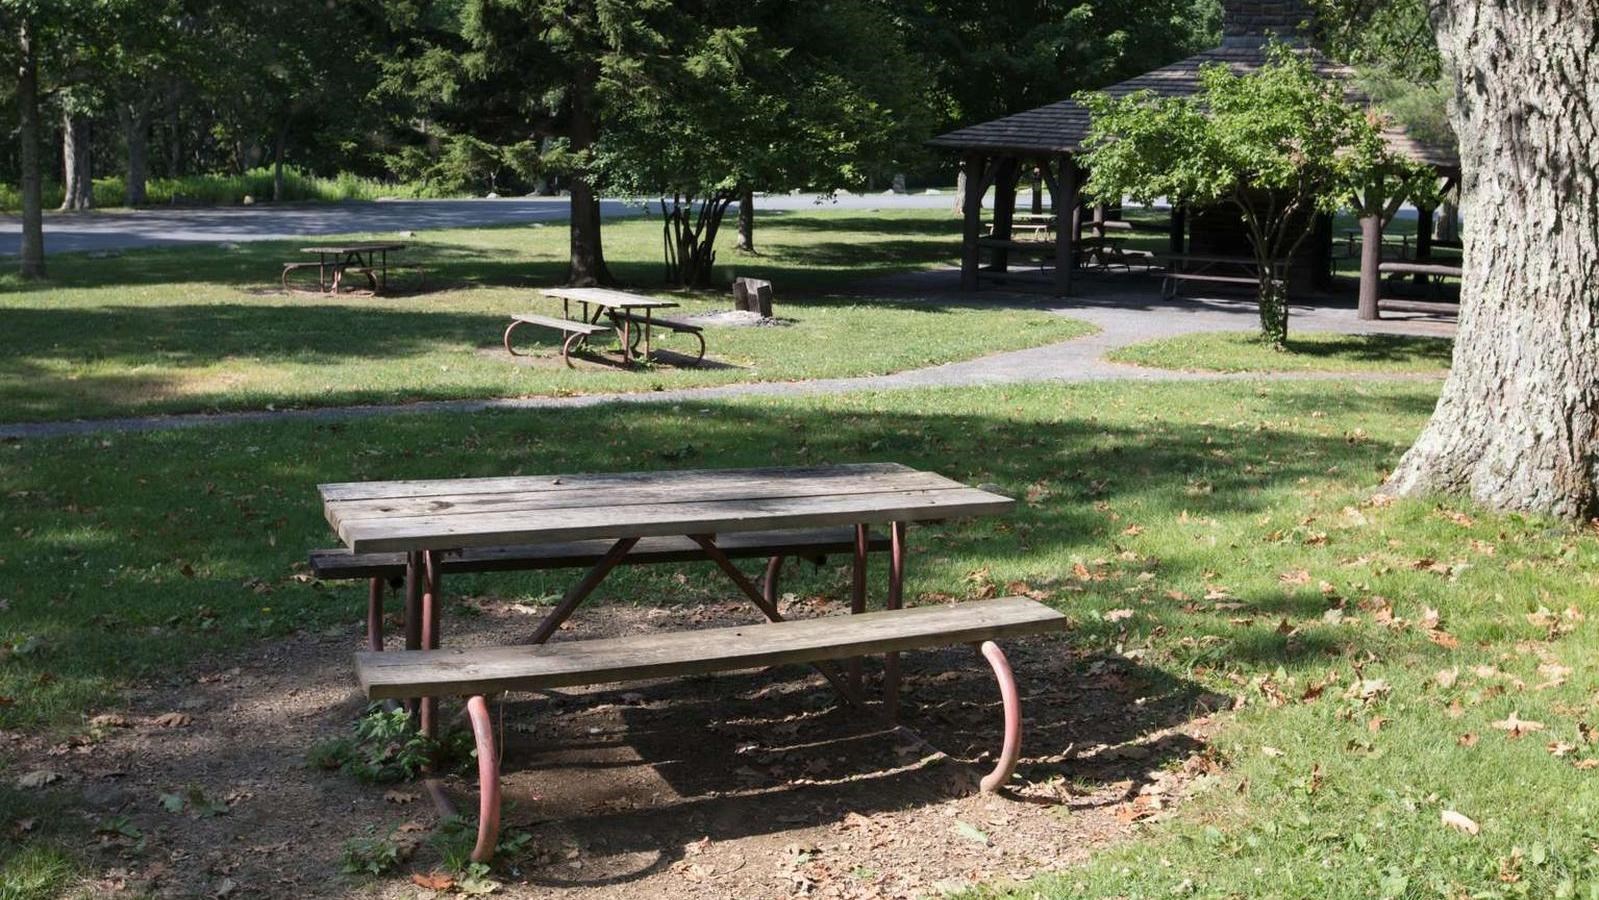 A picnic table in an open grassy area with more picnic tables in the background.